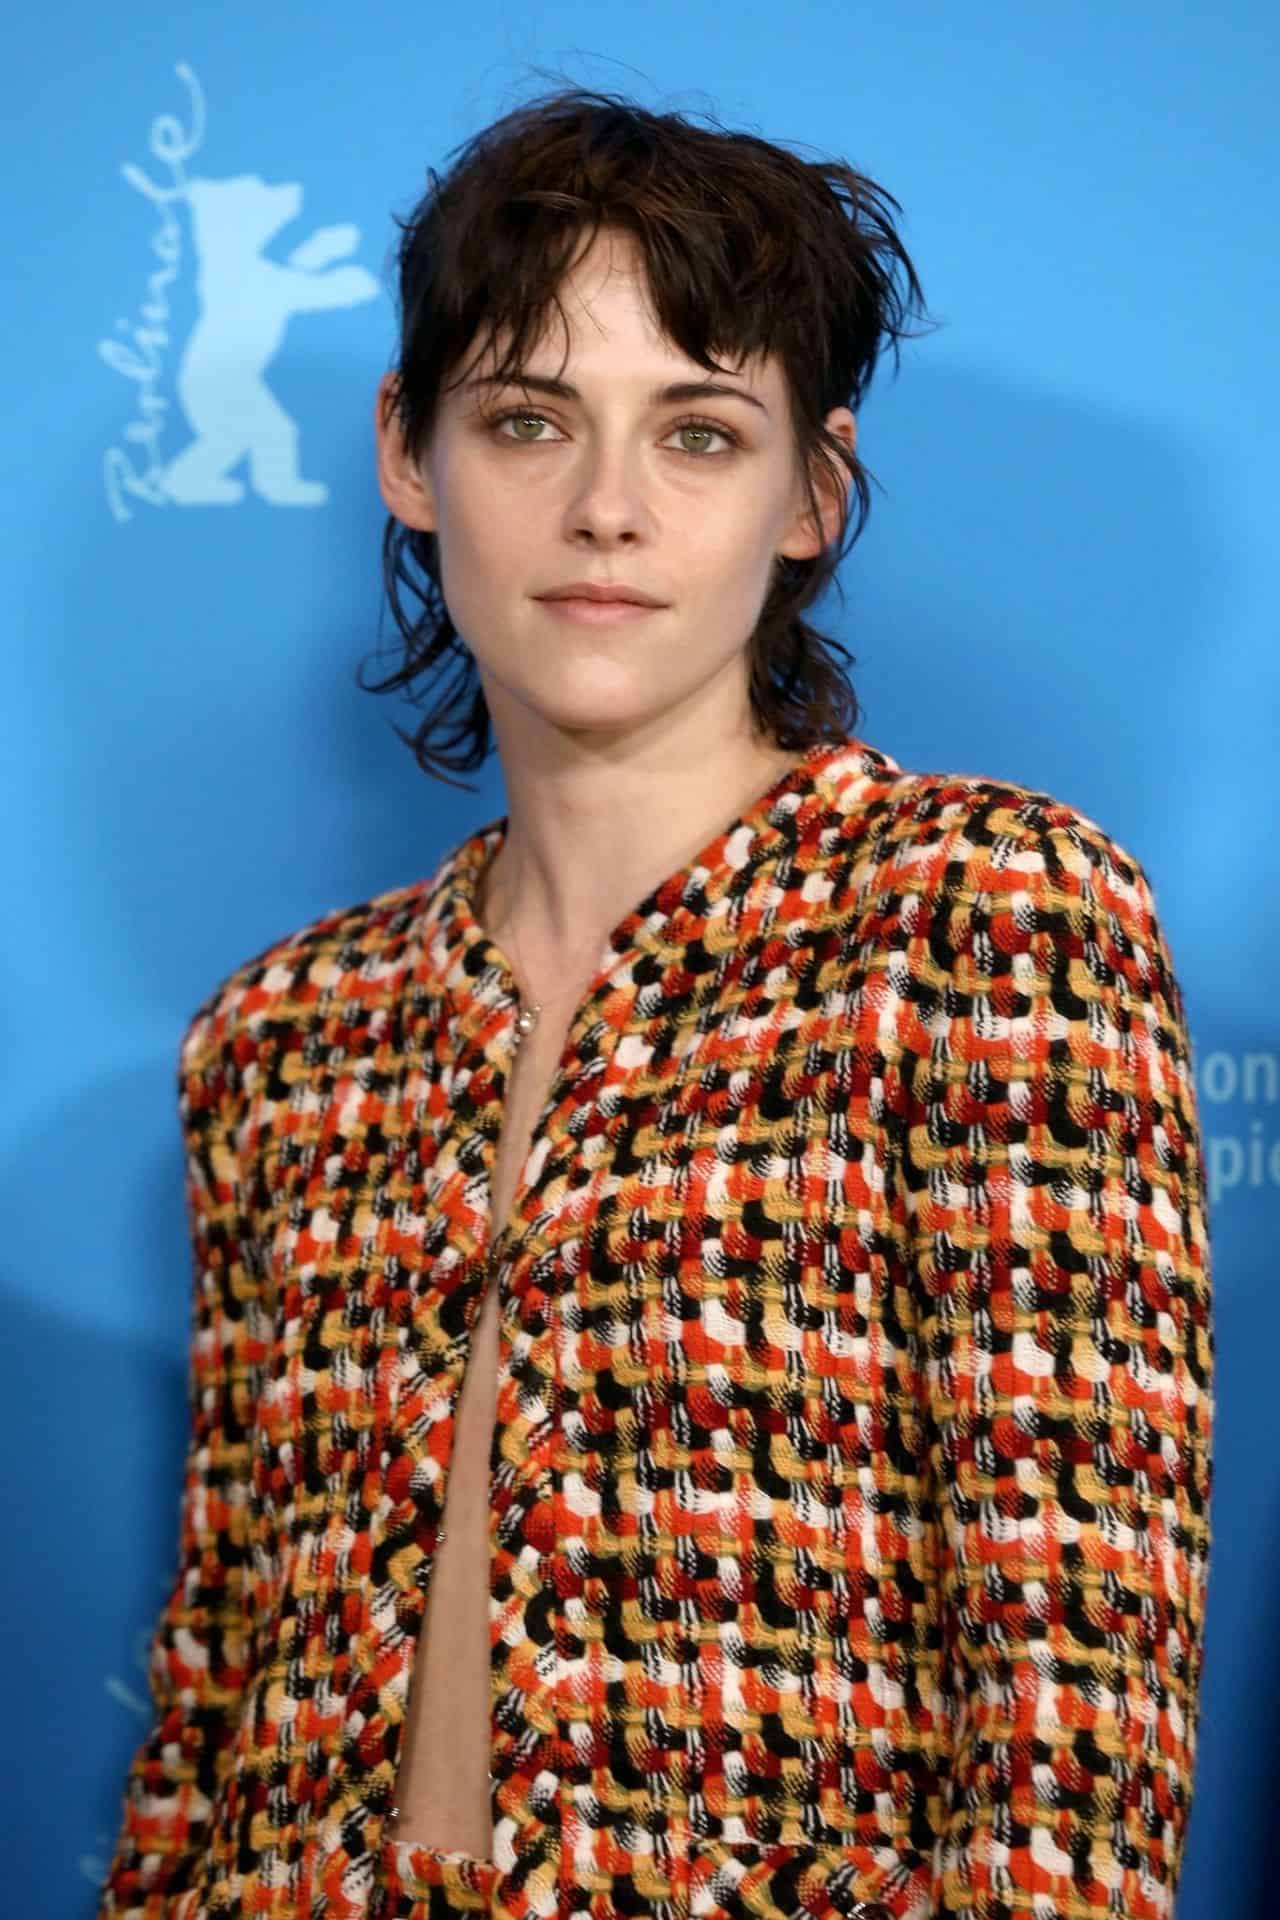 Kristen Stewart Poses in Colorful Ensemble at 73rd Berlinale Film Festival